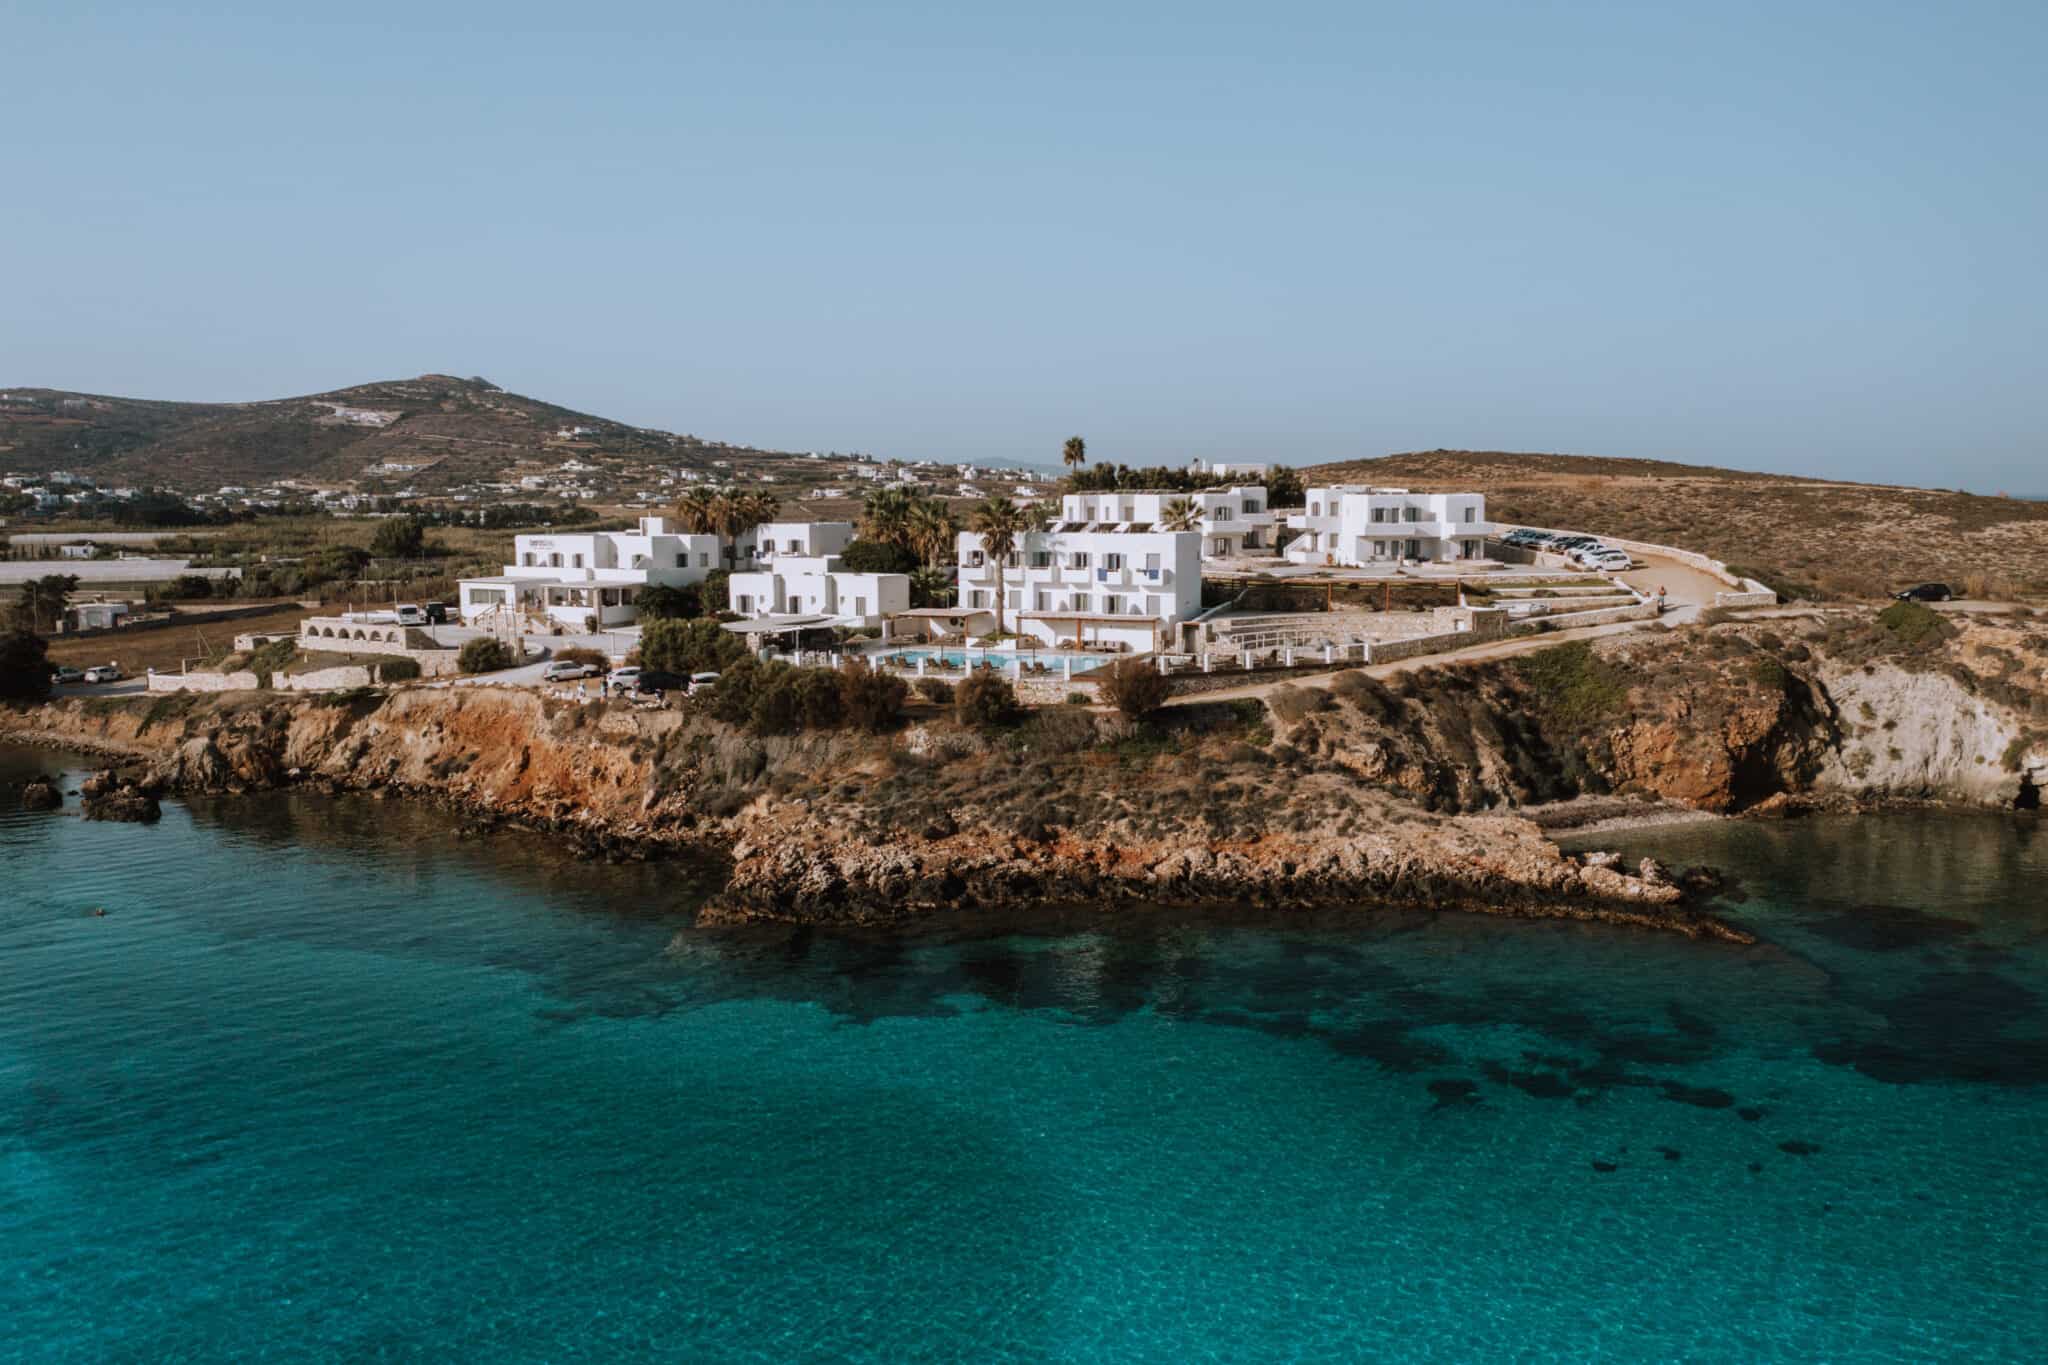 An aerial view of a hotel on the coast of Naousa, Paros Island.